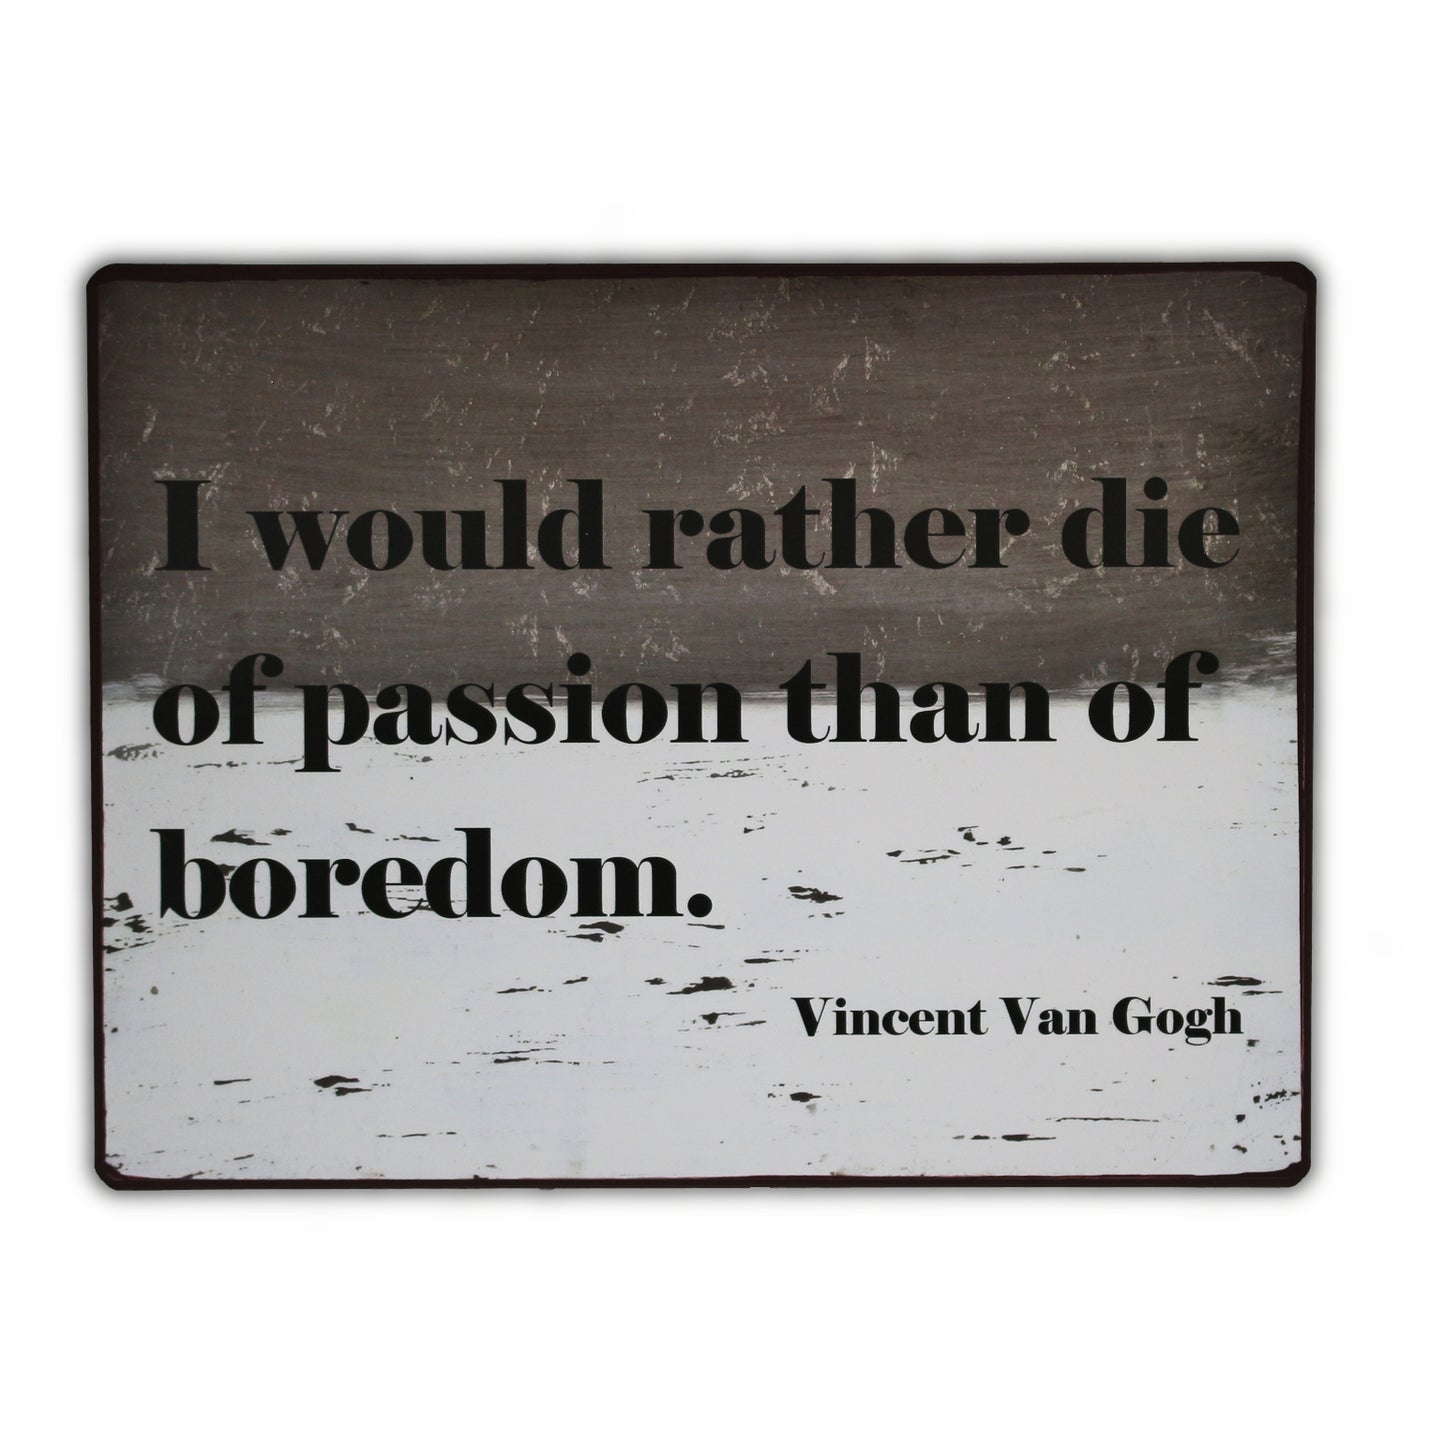 Blechschild: I would rather die of passion than of boredom.